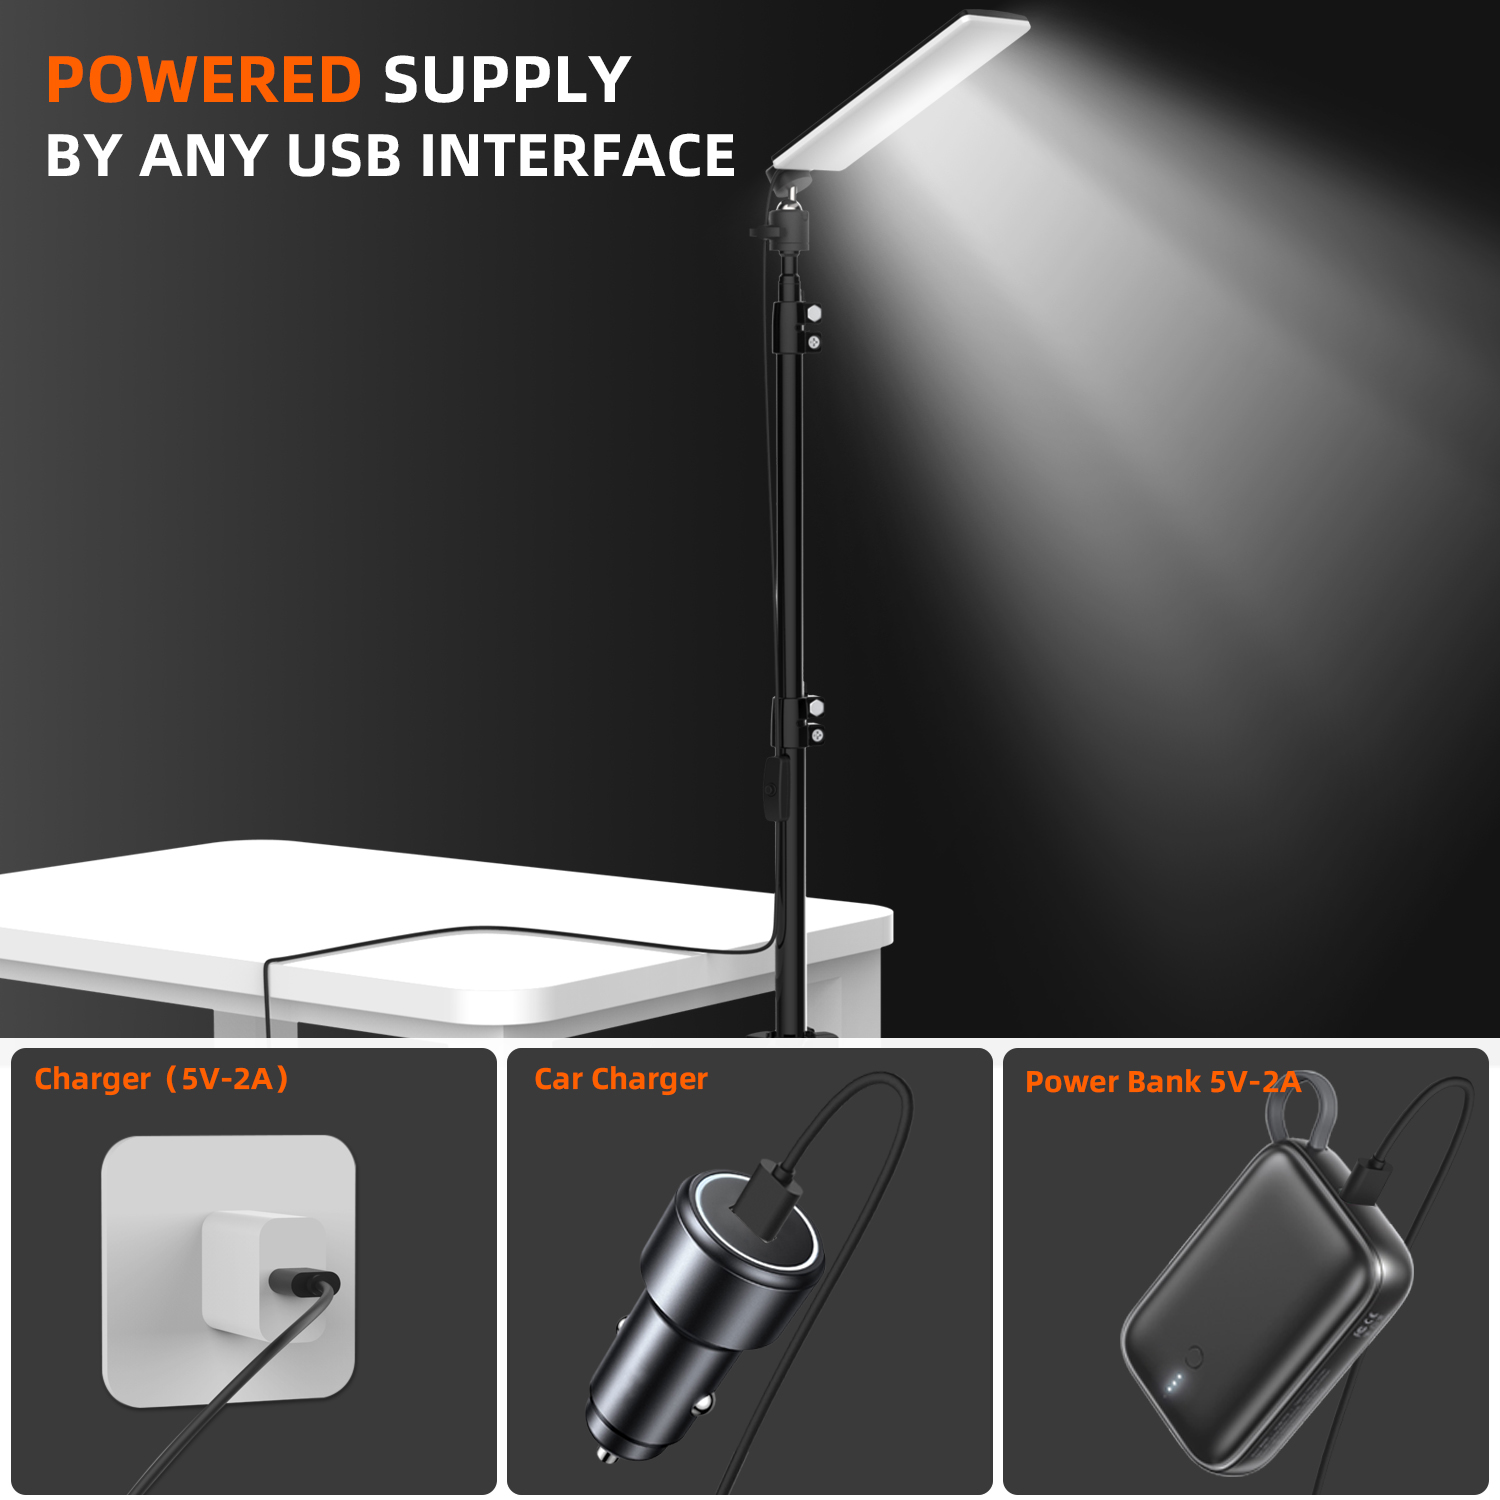 Upgraded-Head-CL03-84LEDs-Retractable--Foldable-18m-Tripod-Stand-Light-6500-7000K-Brightness-Height--1948283-8